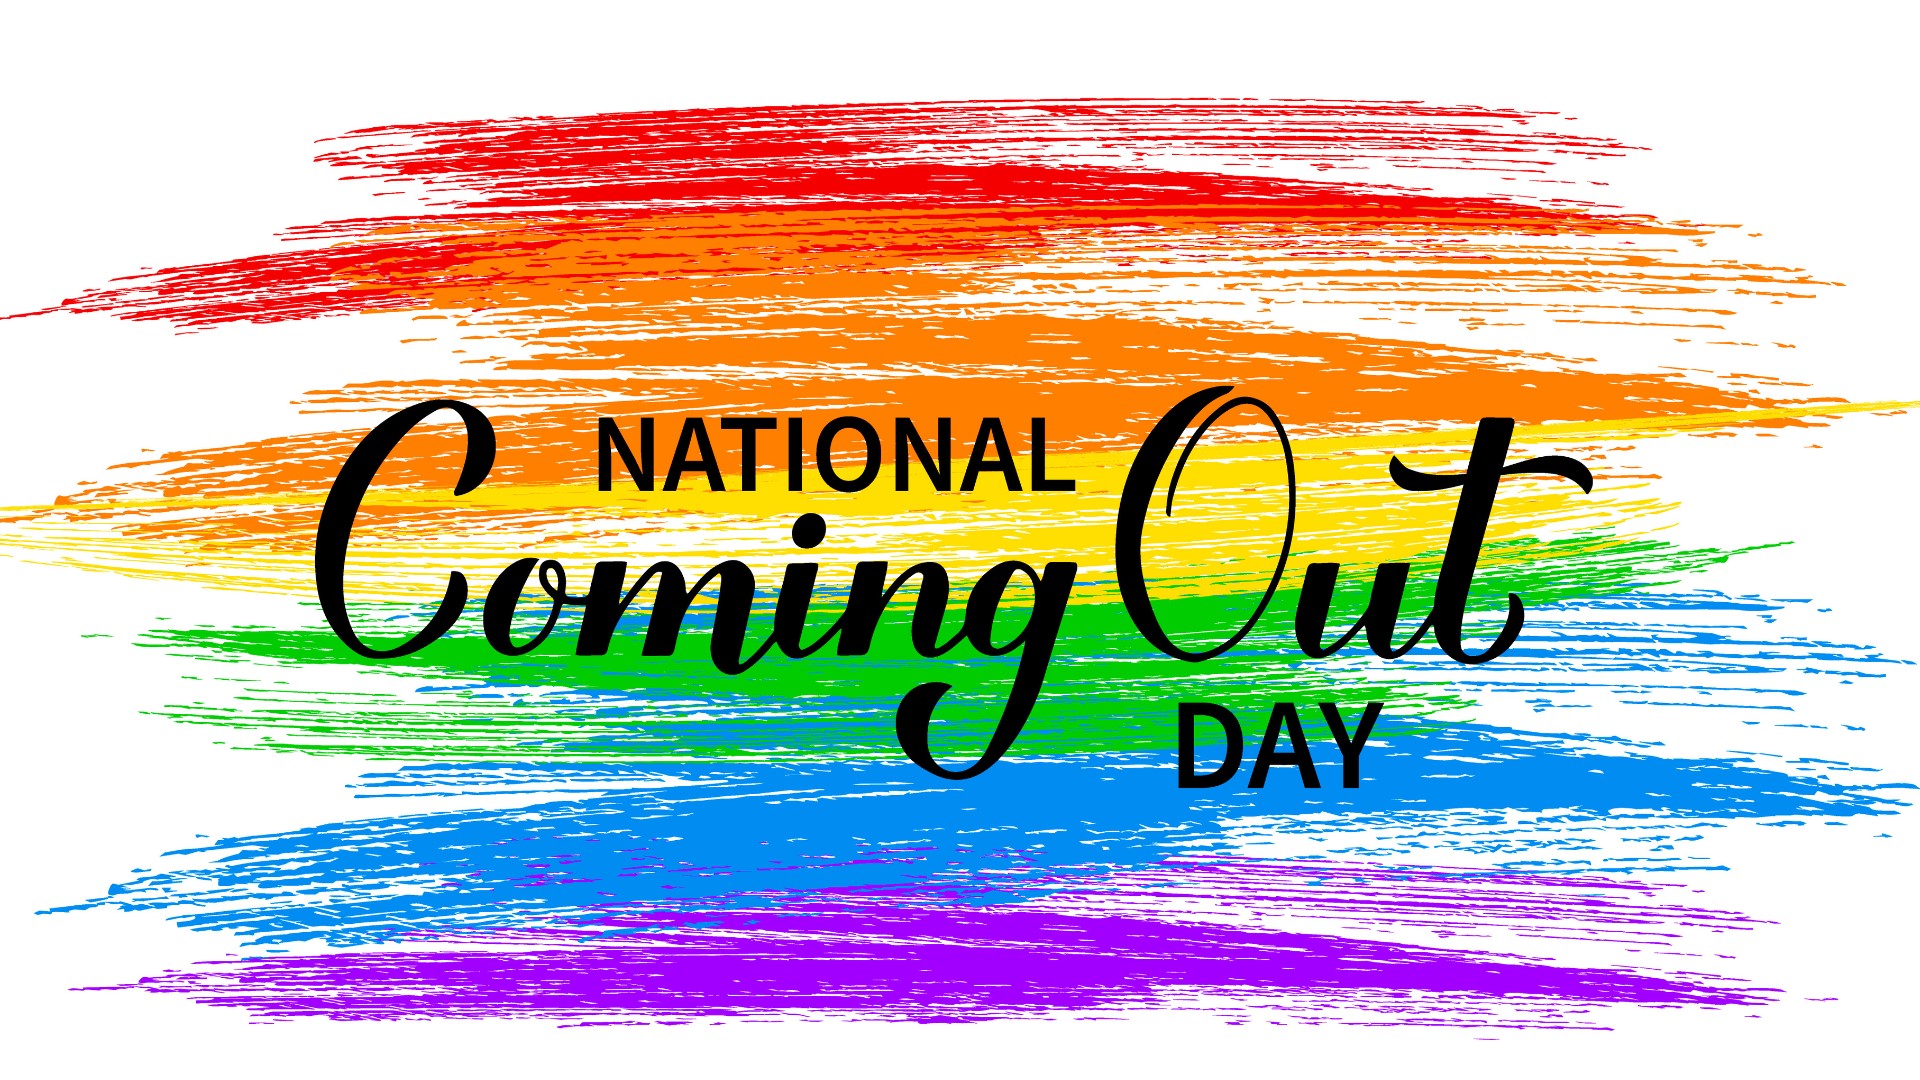 Oct. 11 is marked as National Coming Out Day to celebrate LGBTQ+ people and their right to be their true selves.